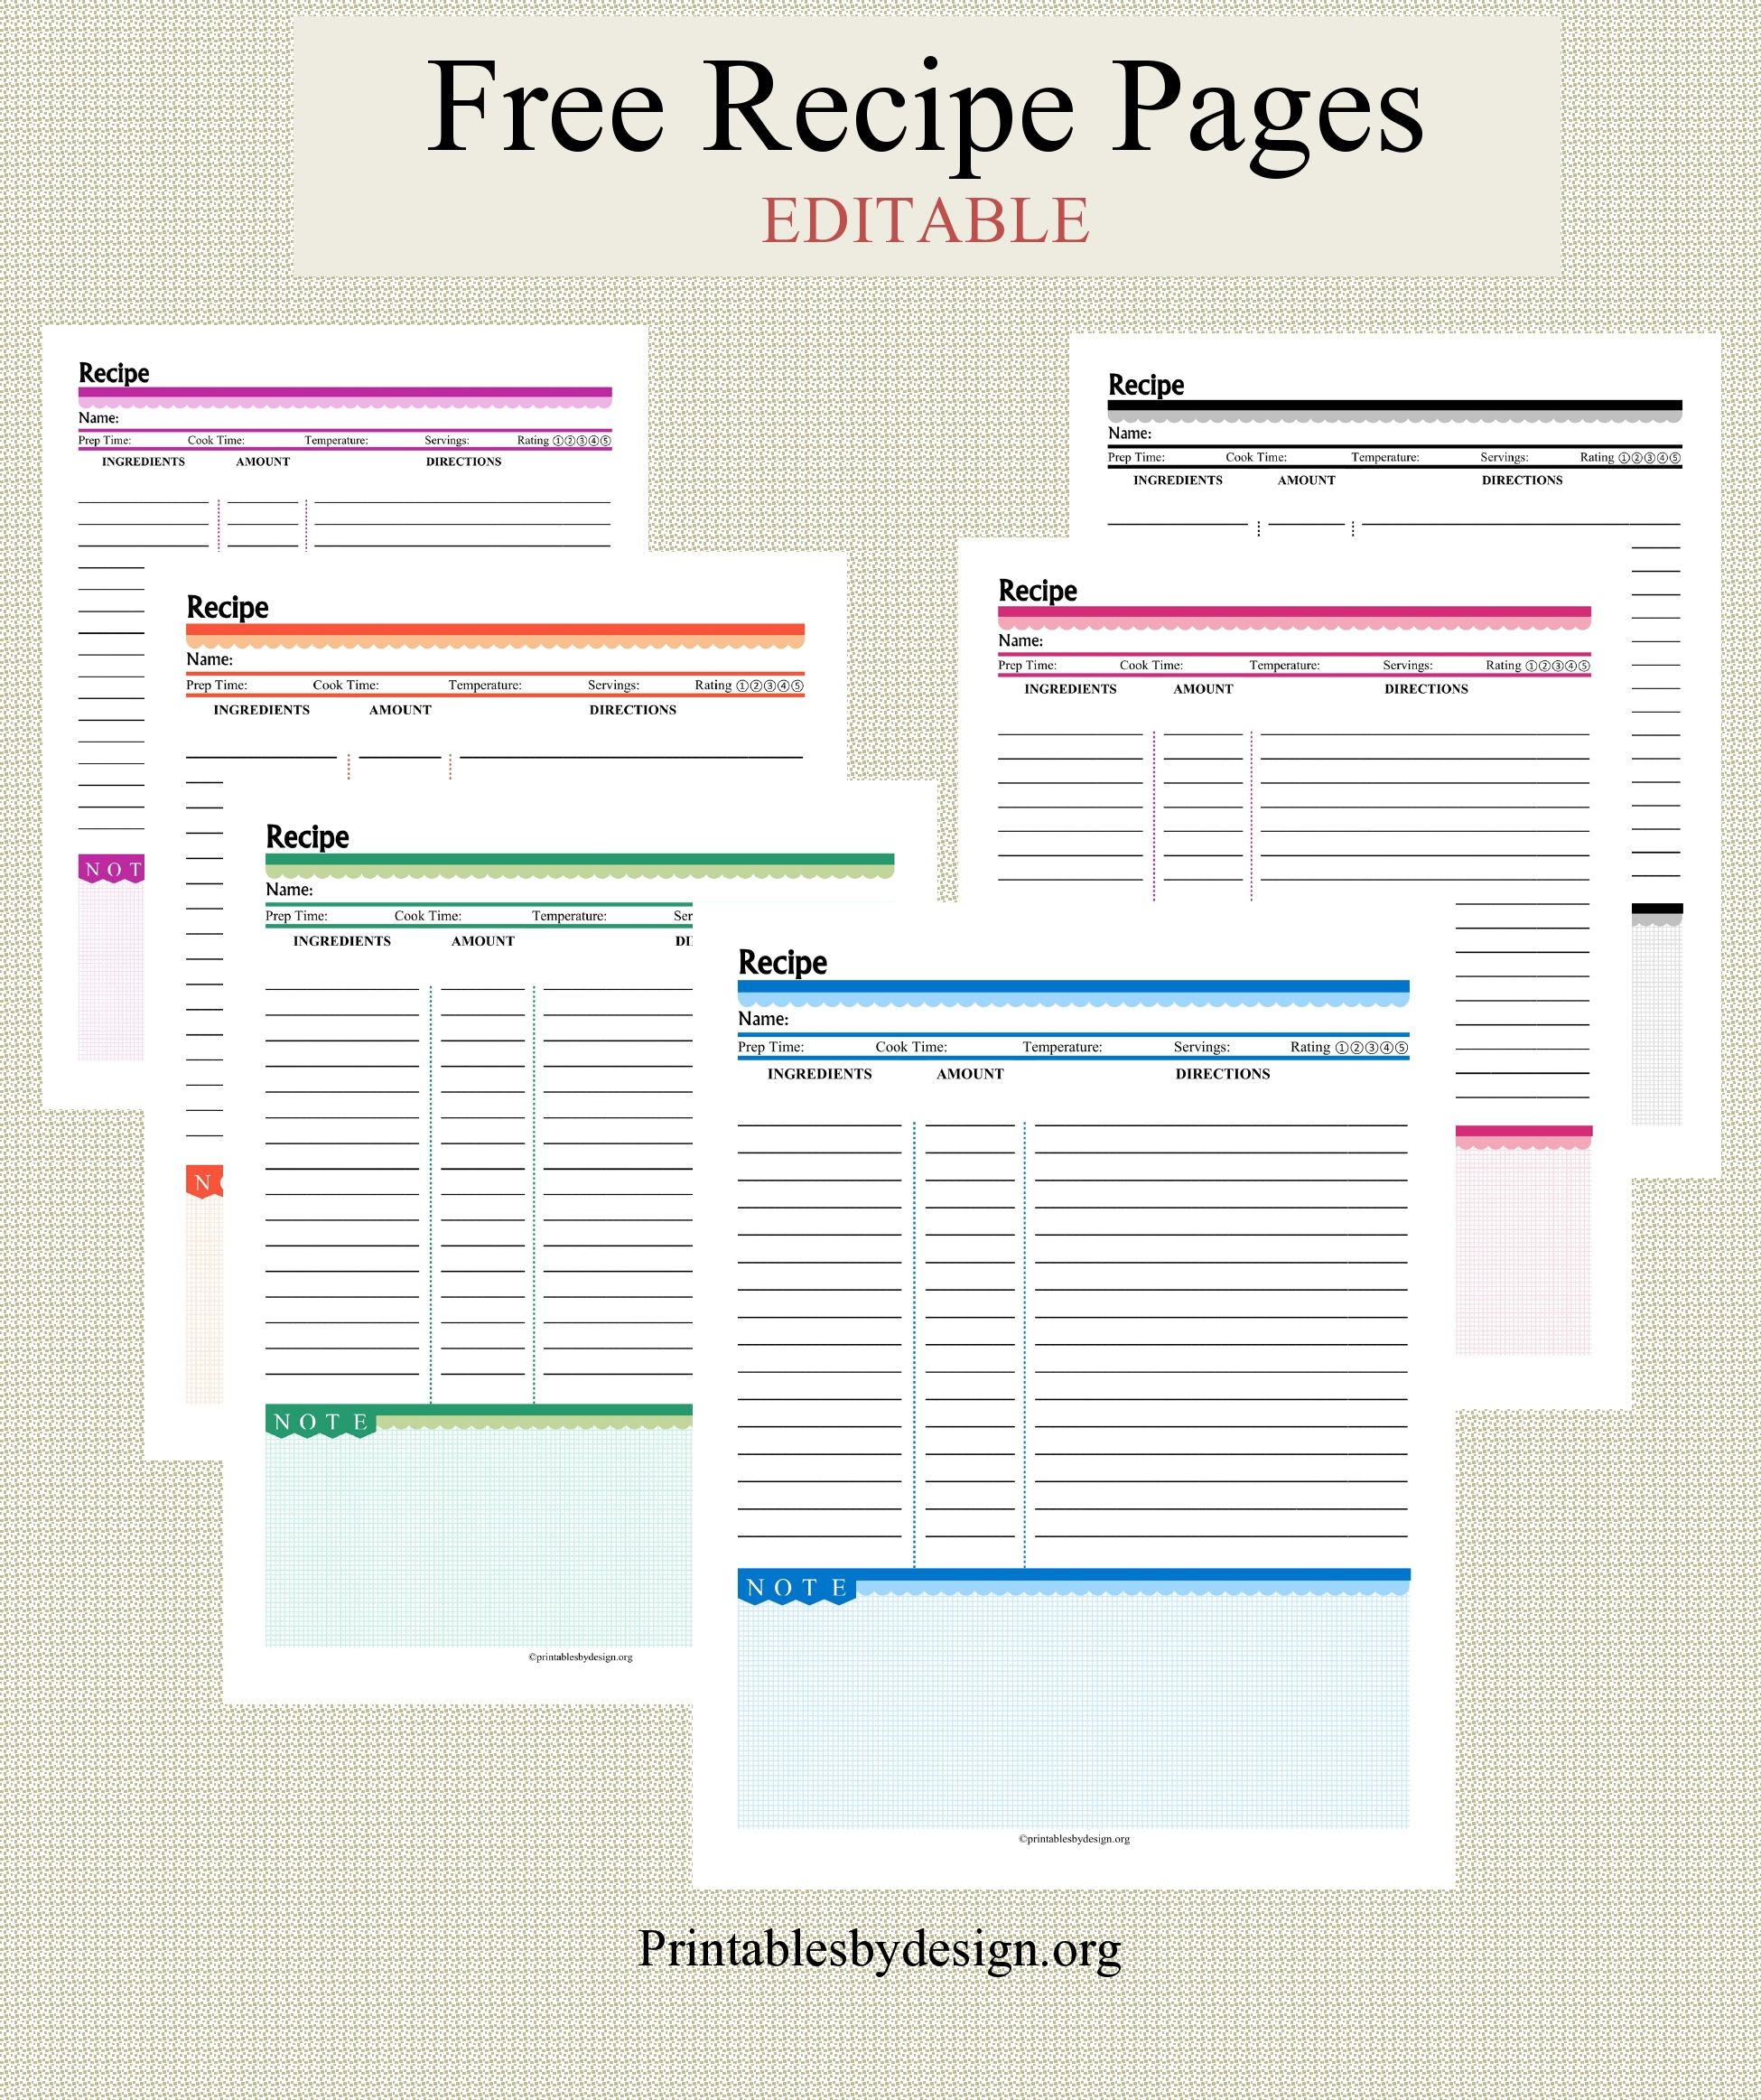 Free Recipe Pages In 6 Colors To Choose From. Editable. | Recipe - Free Printable Recipe Pages